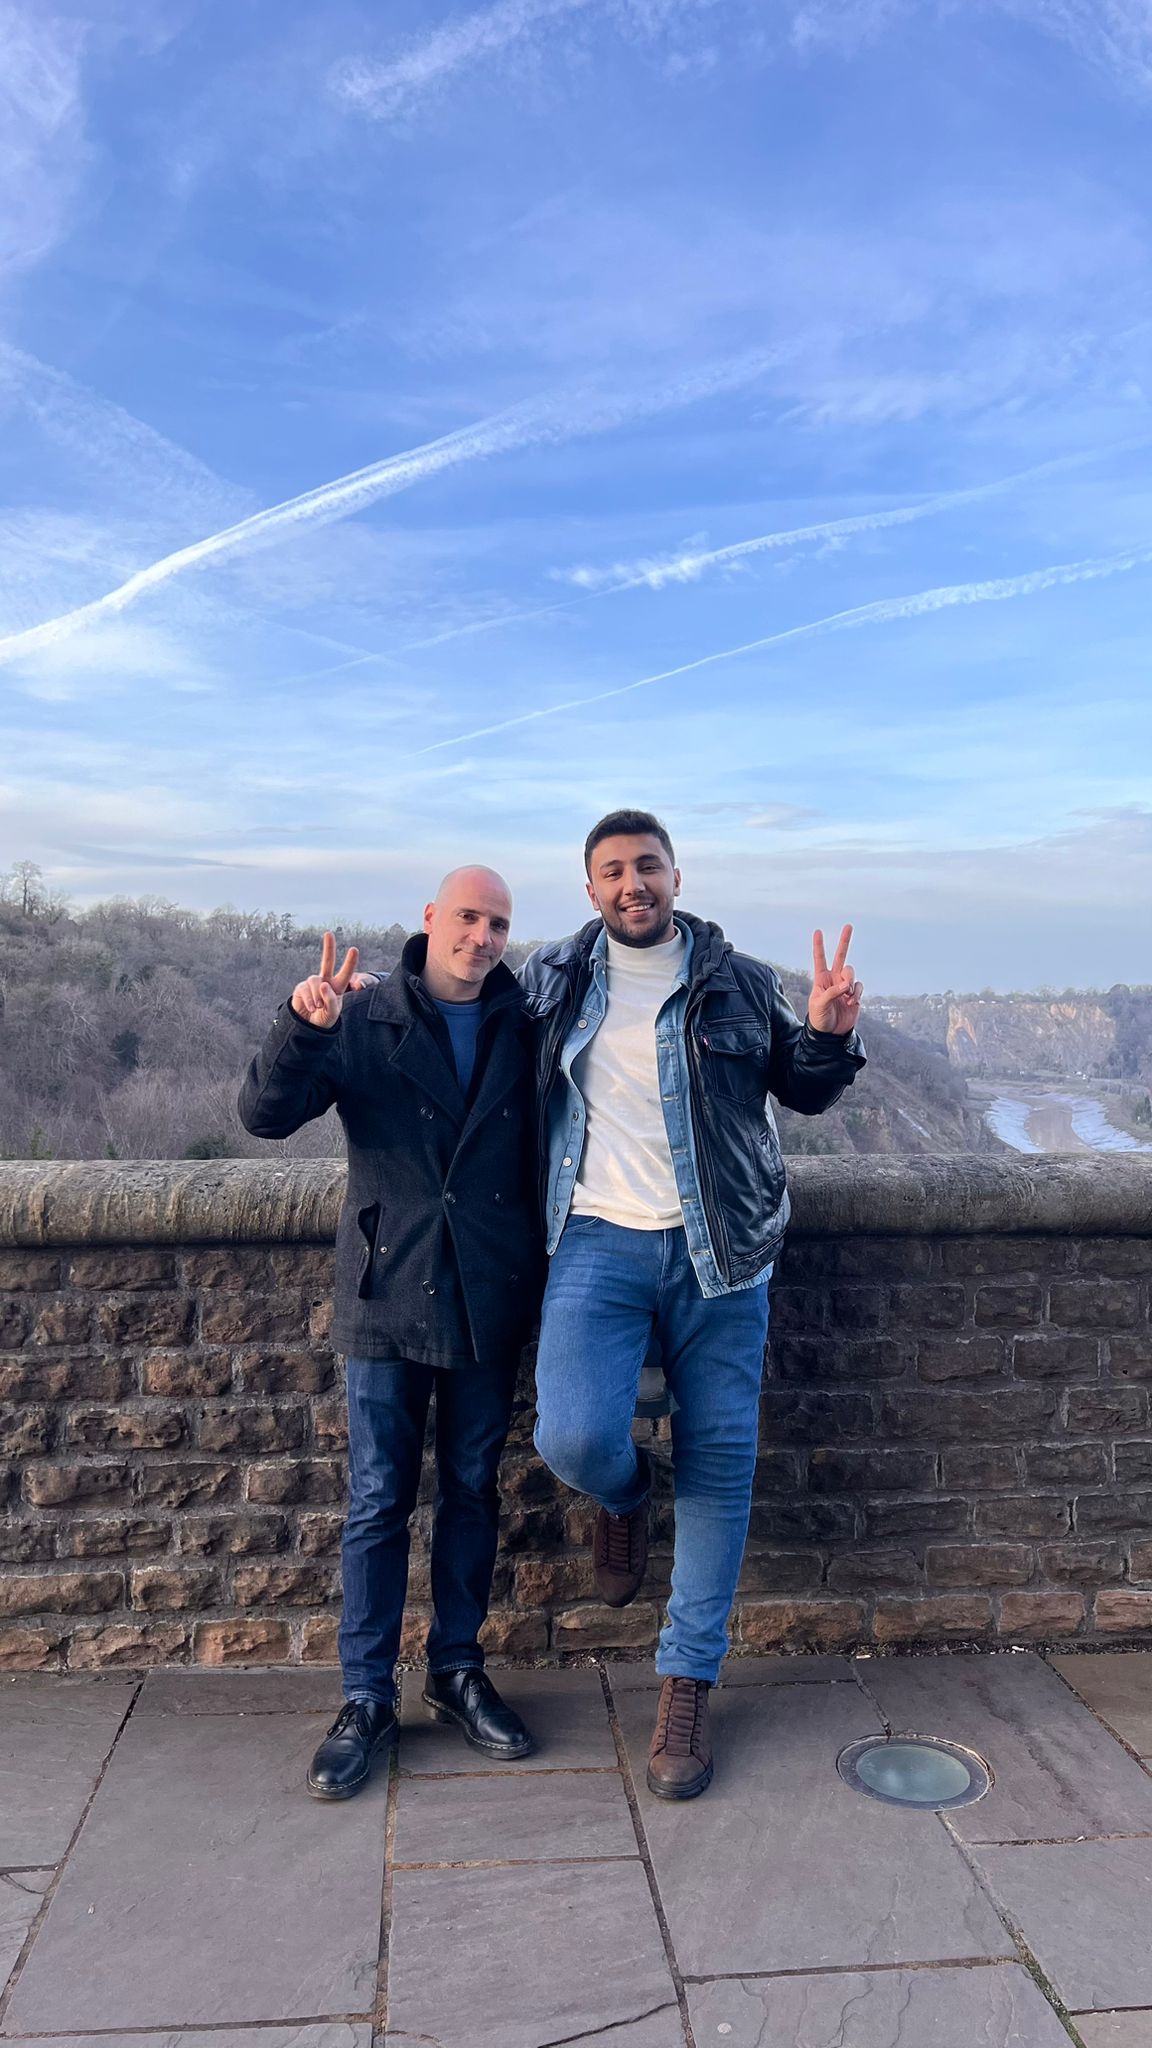 Ronnie Barkan and Mohammed Al Zaza in Bristol. They are both holding their hands up in a peace sign with a blue, cloudy sky behind them